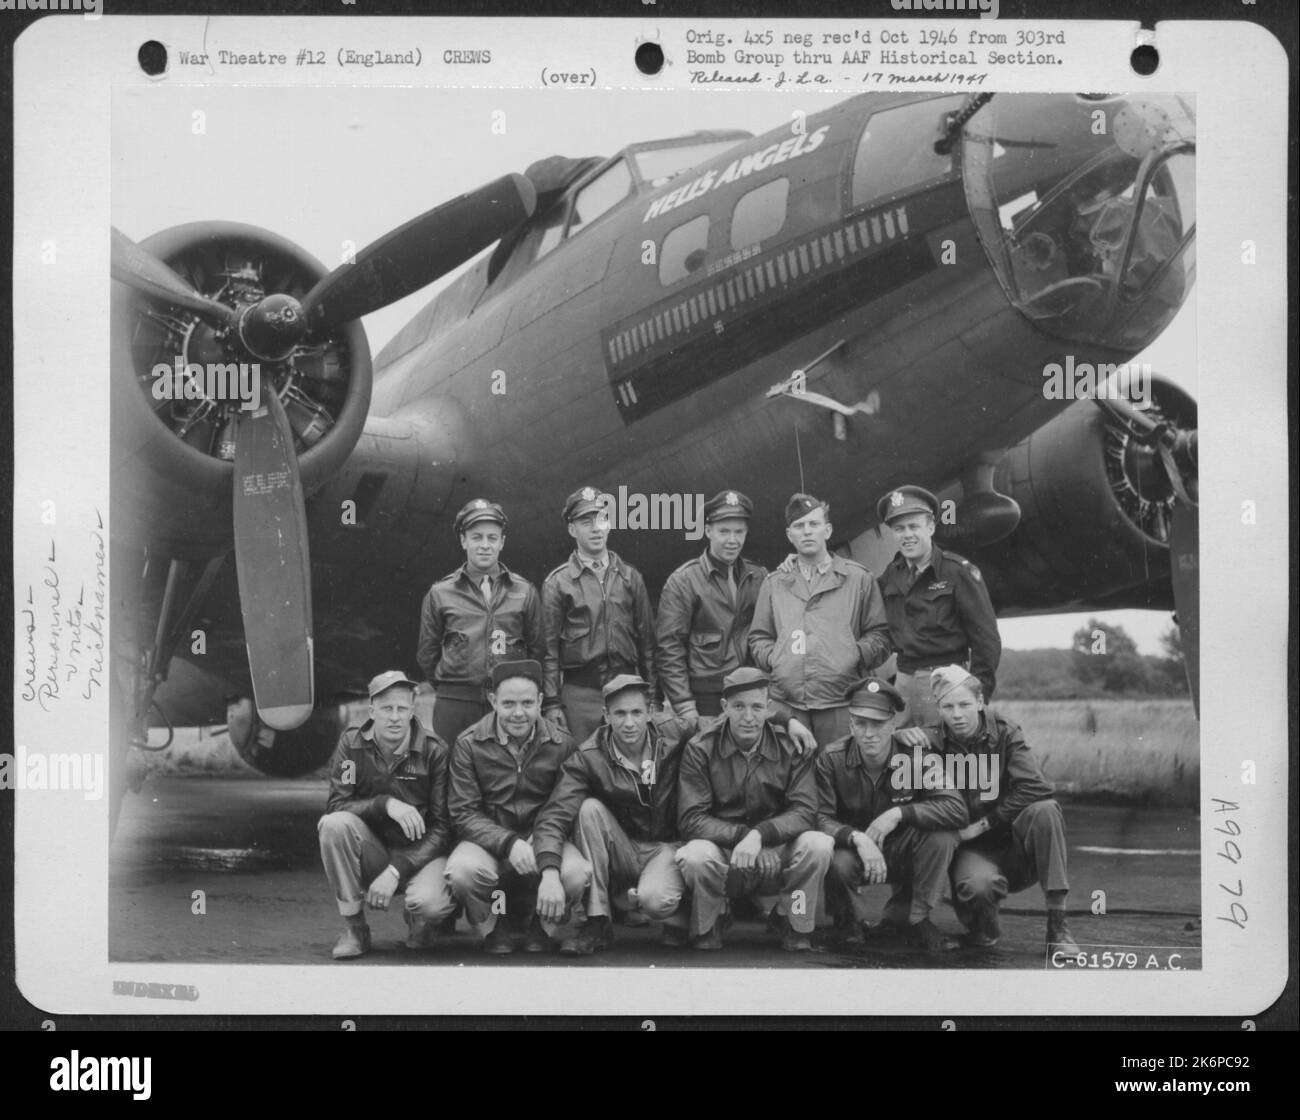 Lt. Sumarlidason And Crew Of The 358Th Bomb Squadron, 303Rd Bomb Group, Beside A Boeing B-17 'Flying Fortress' 'Hell's Angels', England, 20 July 1943. Stock Photo